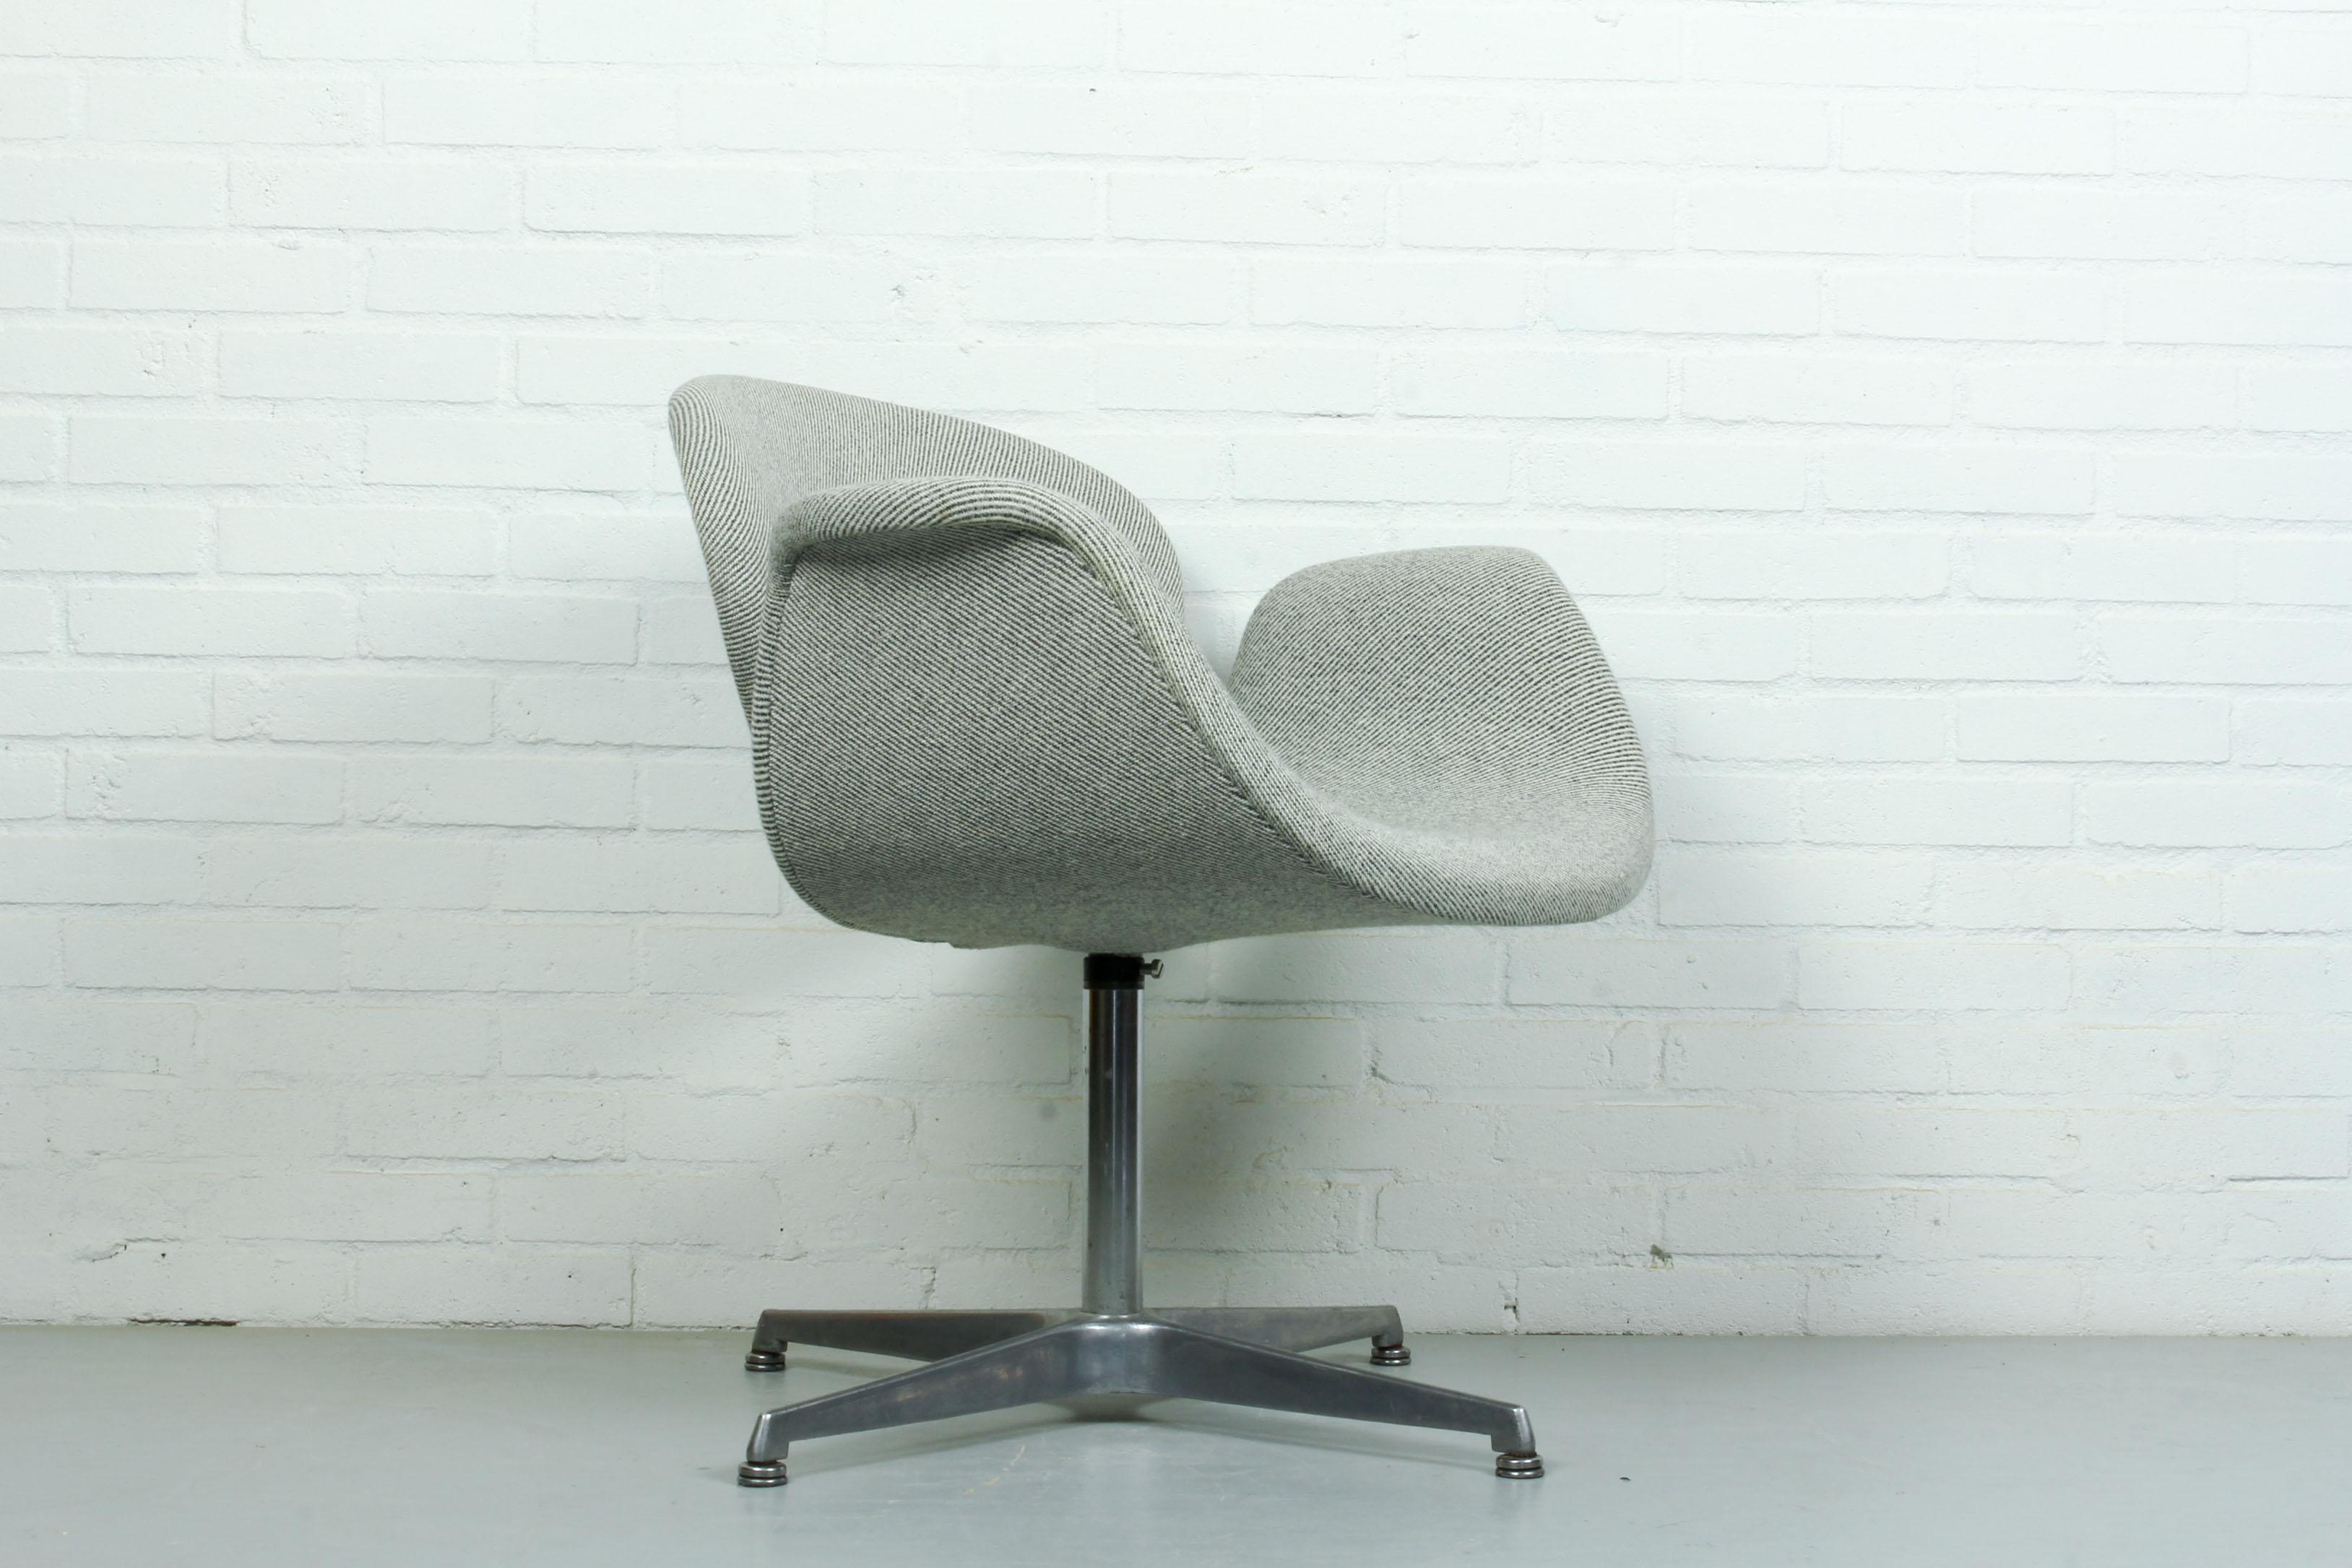 Little Tulip armchair dinnner chair, designed by Pierre Paulin in the 1960s. It was manufactured by Artifort. The chair features a metal base with a wooden frame and original upholstery in grey melange in very good condition.
  